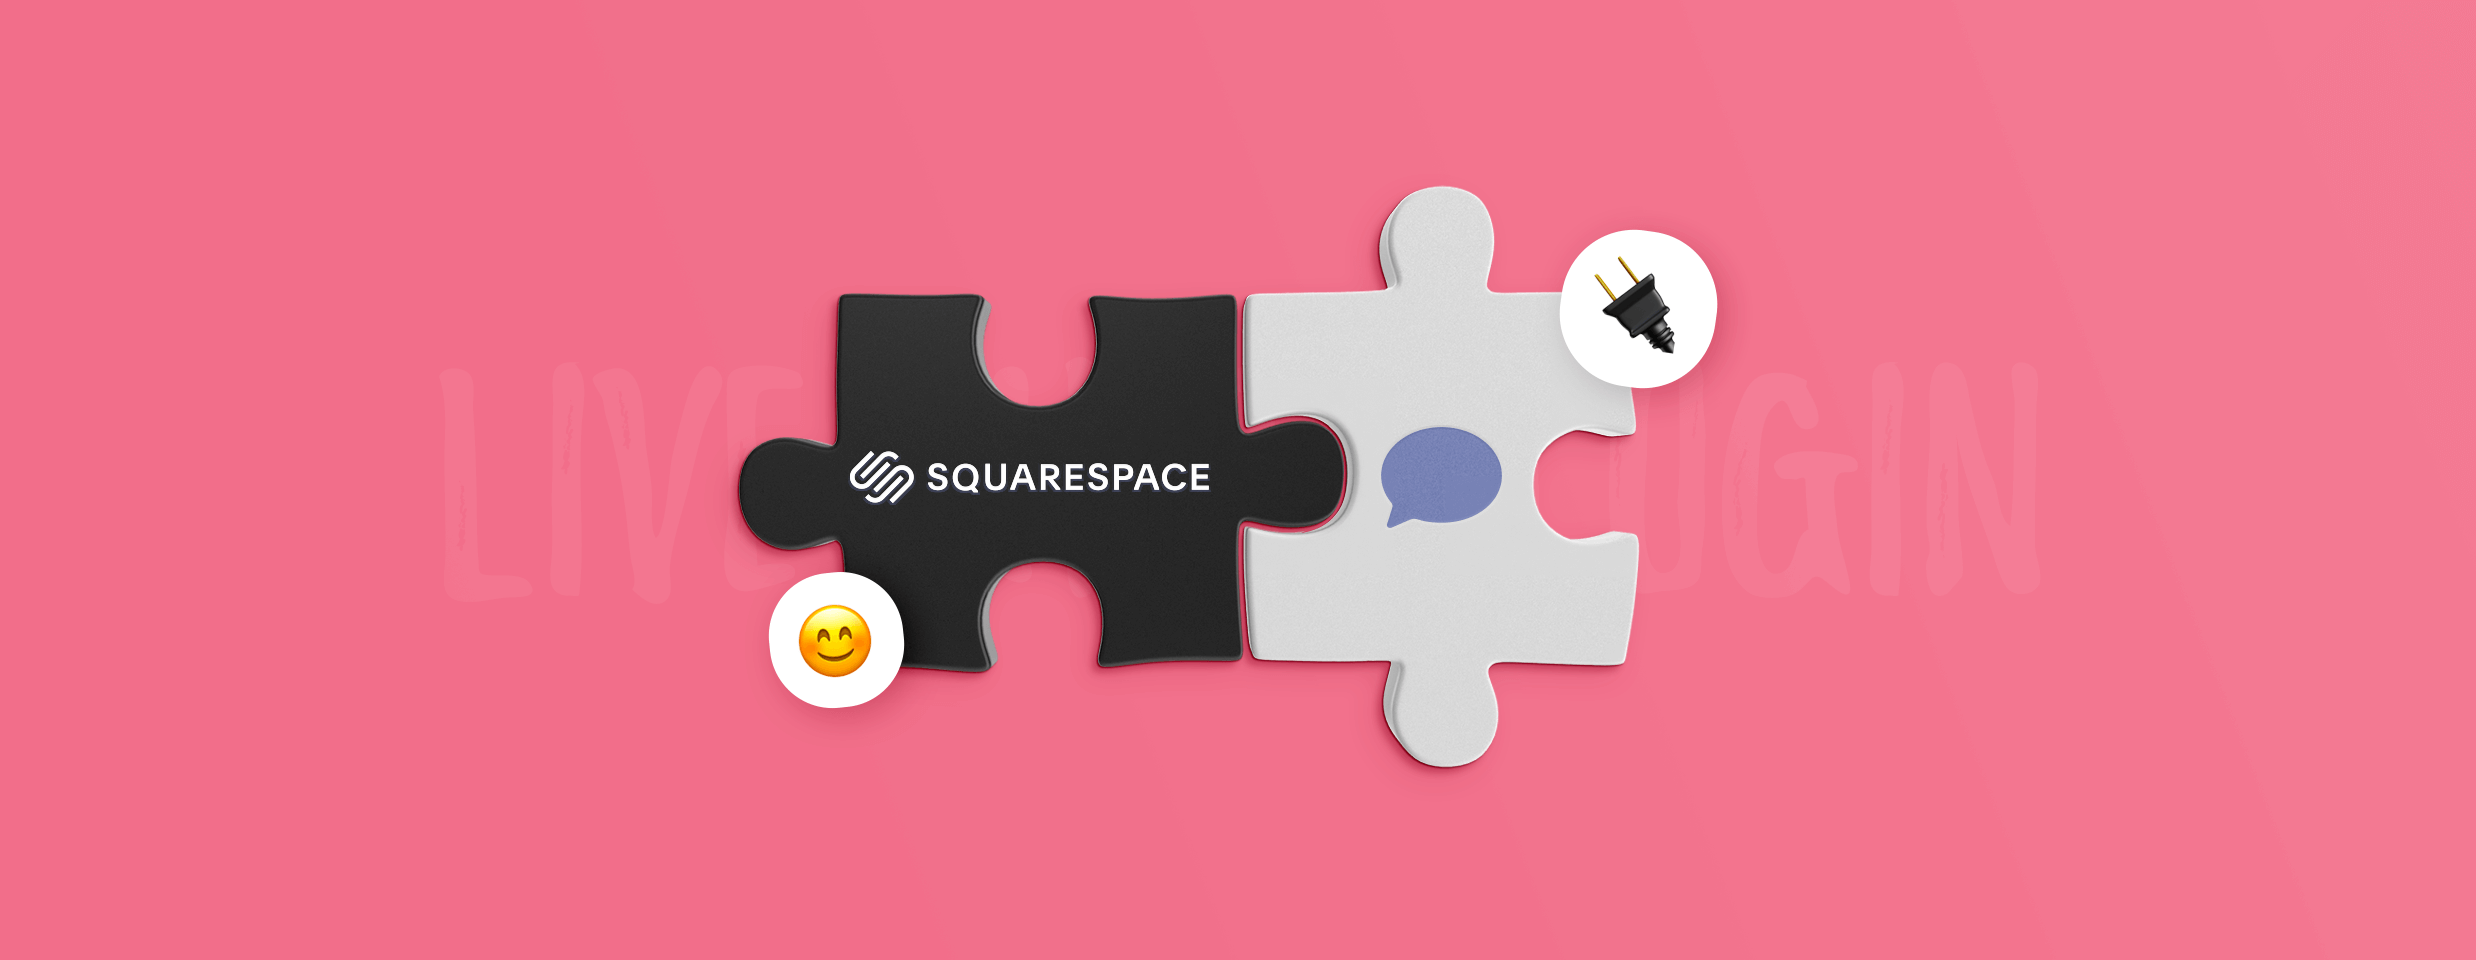 Squarespace chat plugins cover image